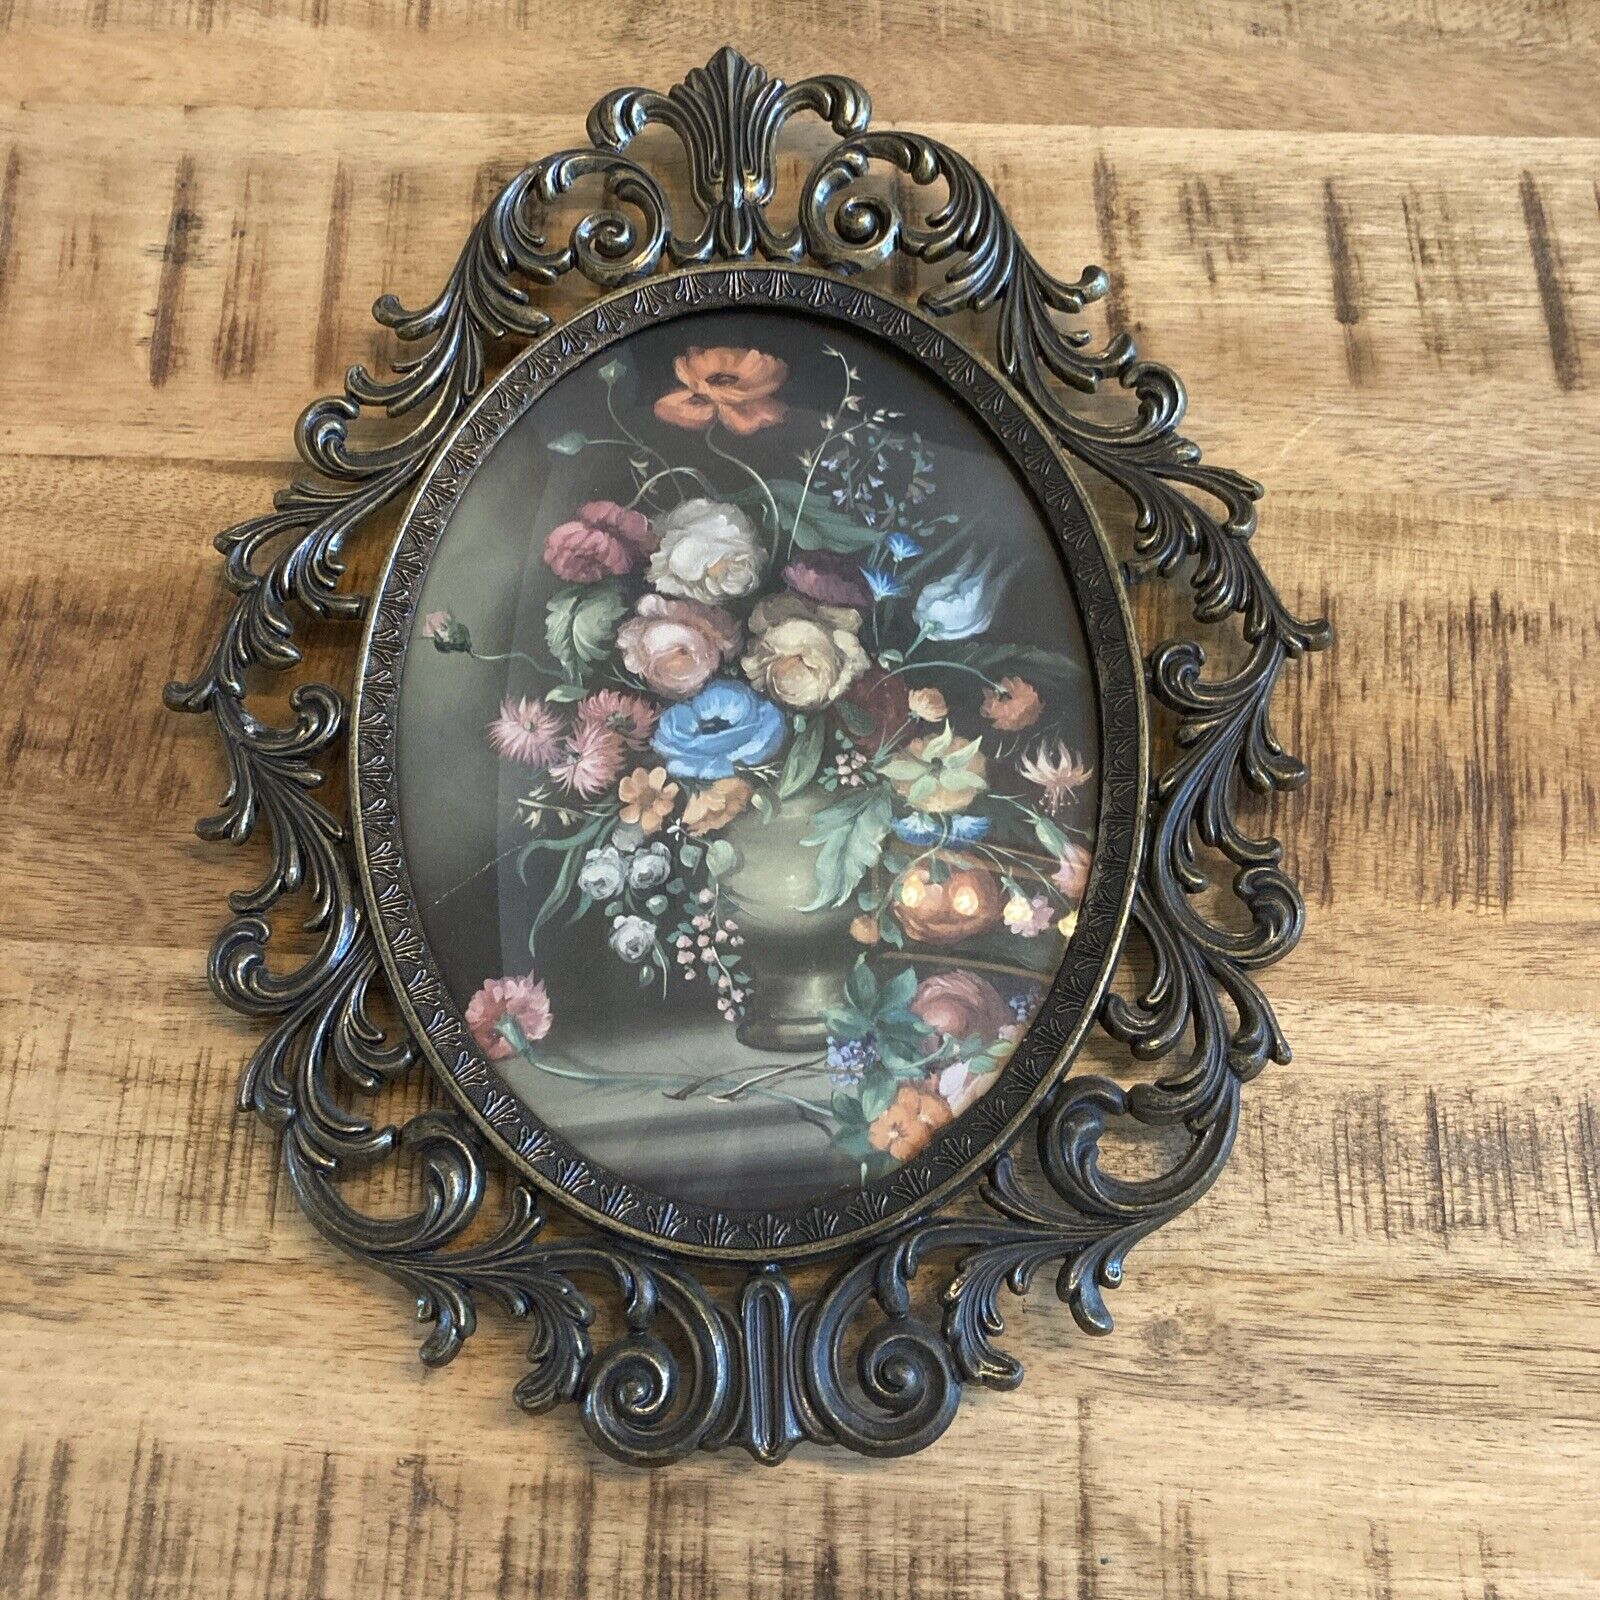 Vintage Floral Print Convex Glass Oval Ornate Metal Frame - Made In Italy